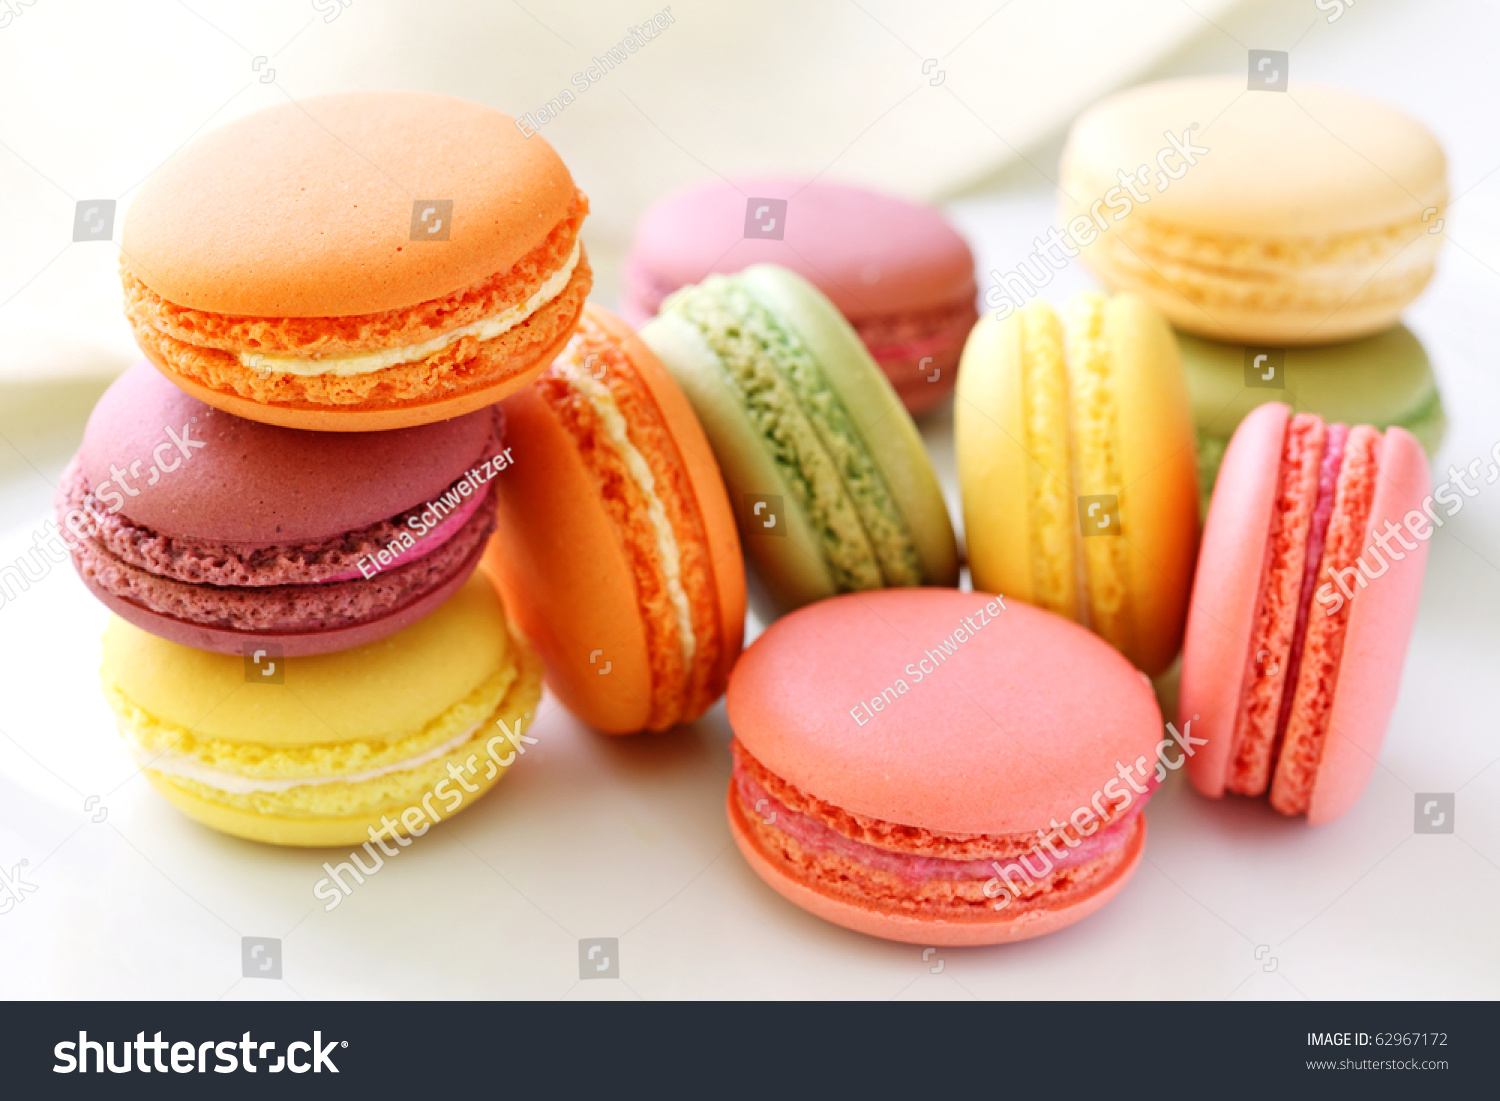 Colorful Macaroons On White Background Stock Photo 62967172 : Shutterstock